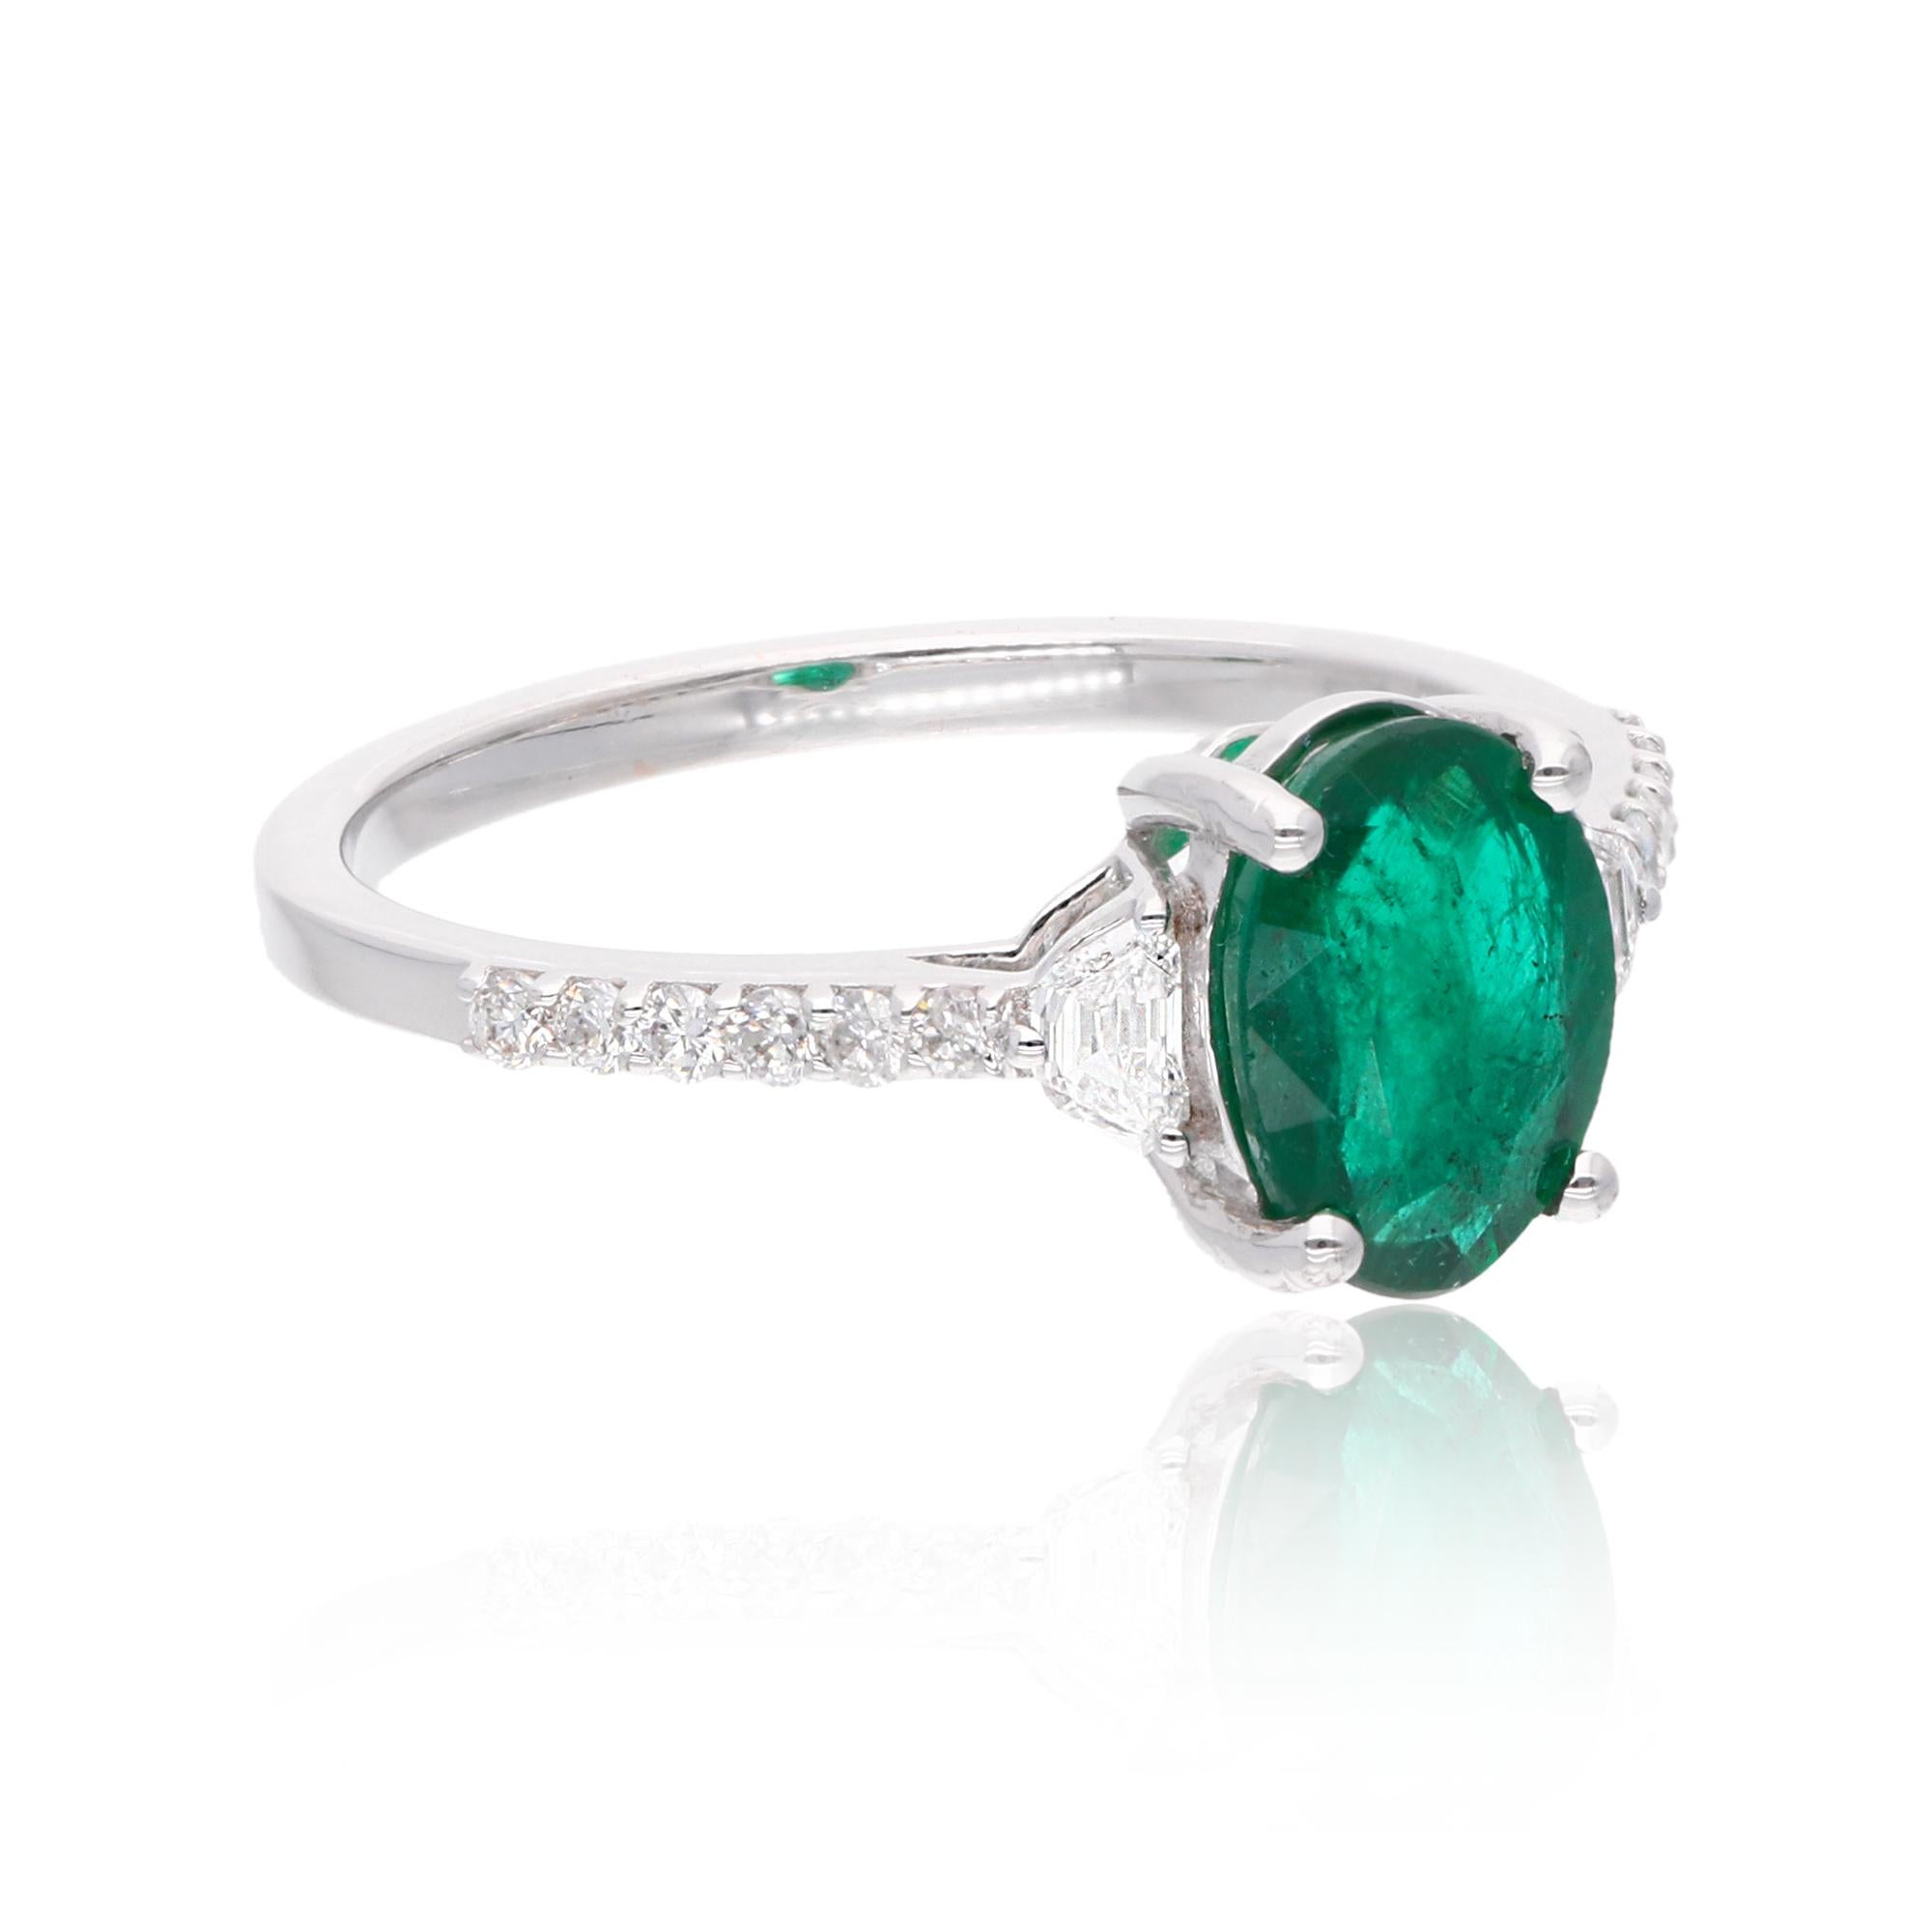 Item Code :- SER-22069
Gross Wt. :- 2.78 gm
18k Solid White Gold Wt. :- 2.45 gm
Natural Diamond Wt. :- 0.33 Ct. ( AVERAGE DIAMOND CLARITY SI1-SI2 & COLOR H-I )
Zambian Emerald Wt. :- 1.30 Ct.
Ring Size :- 7 US & All size available

✦